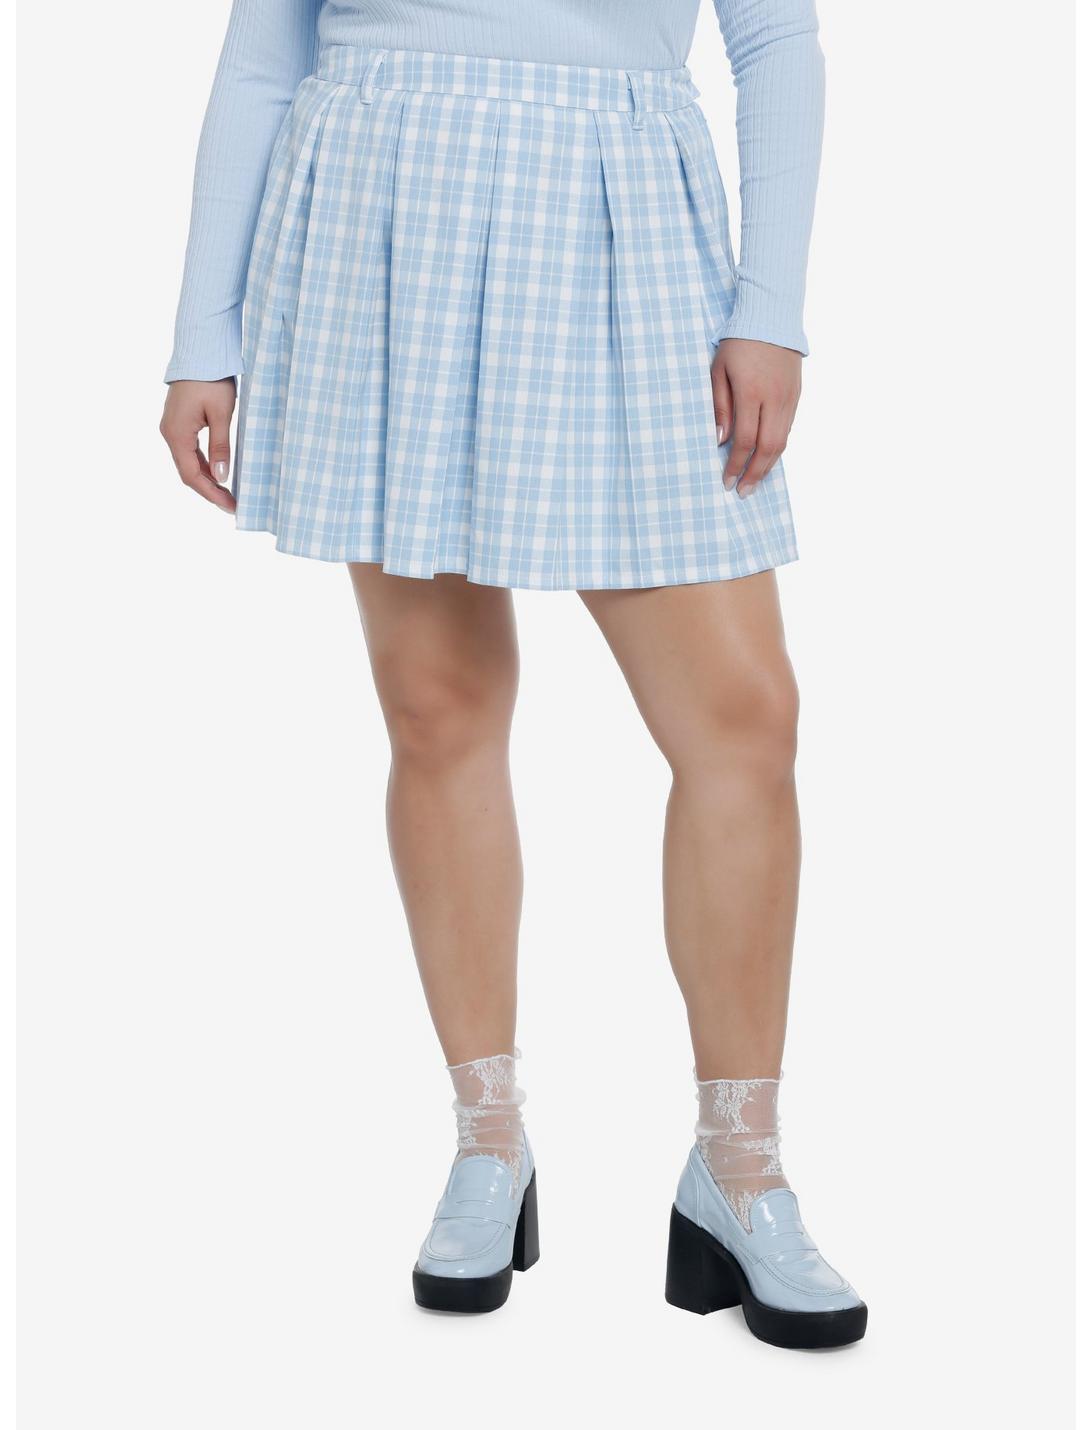 Sweet Society Baby Blue Plaid Pleated Skirt Plus Size, MULTI, hi-res